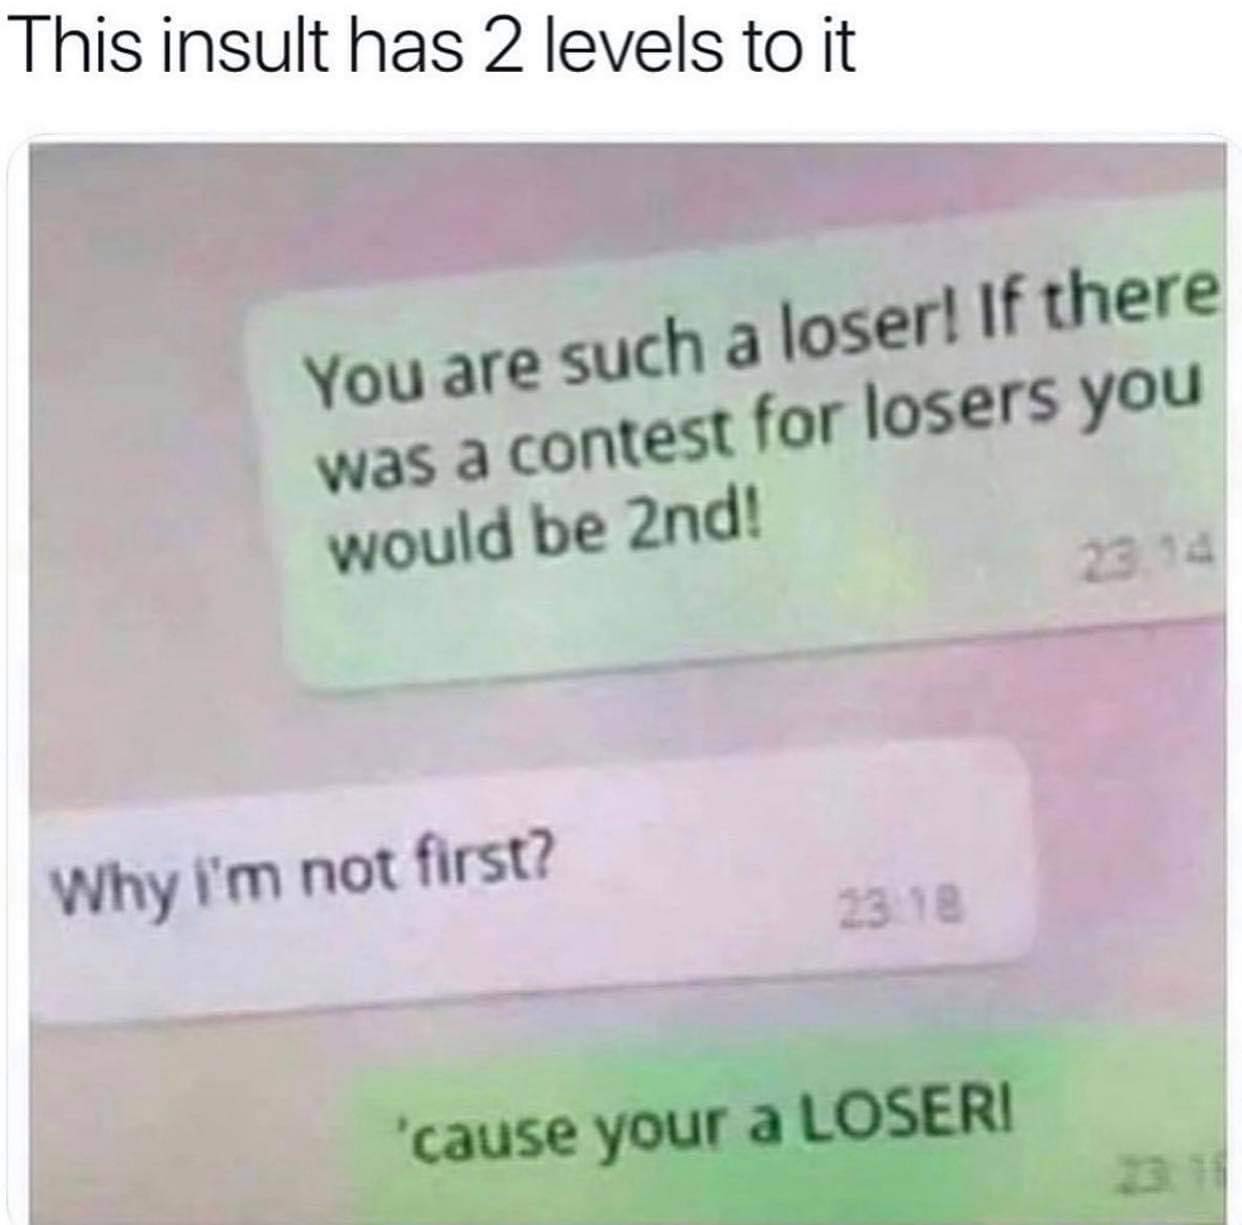 things that make me laugh - This insult has 2 levels to it You are such a loser! If there was a contest for losers you would be 2nd! Why i'm not first? 2318 'cause your a Loseri